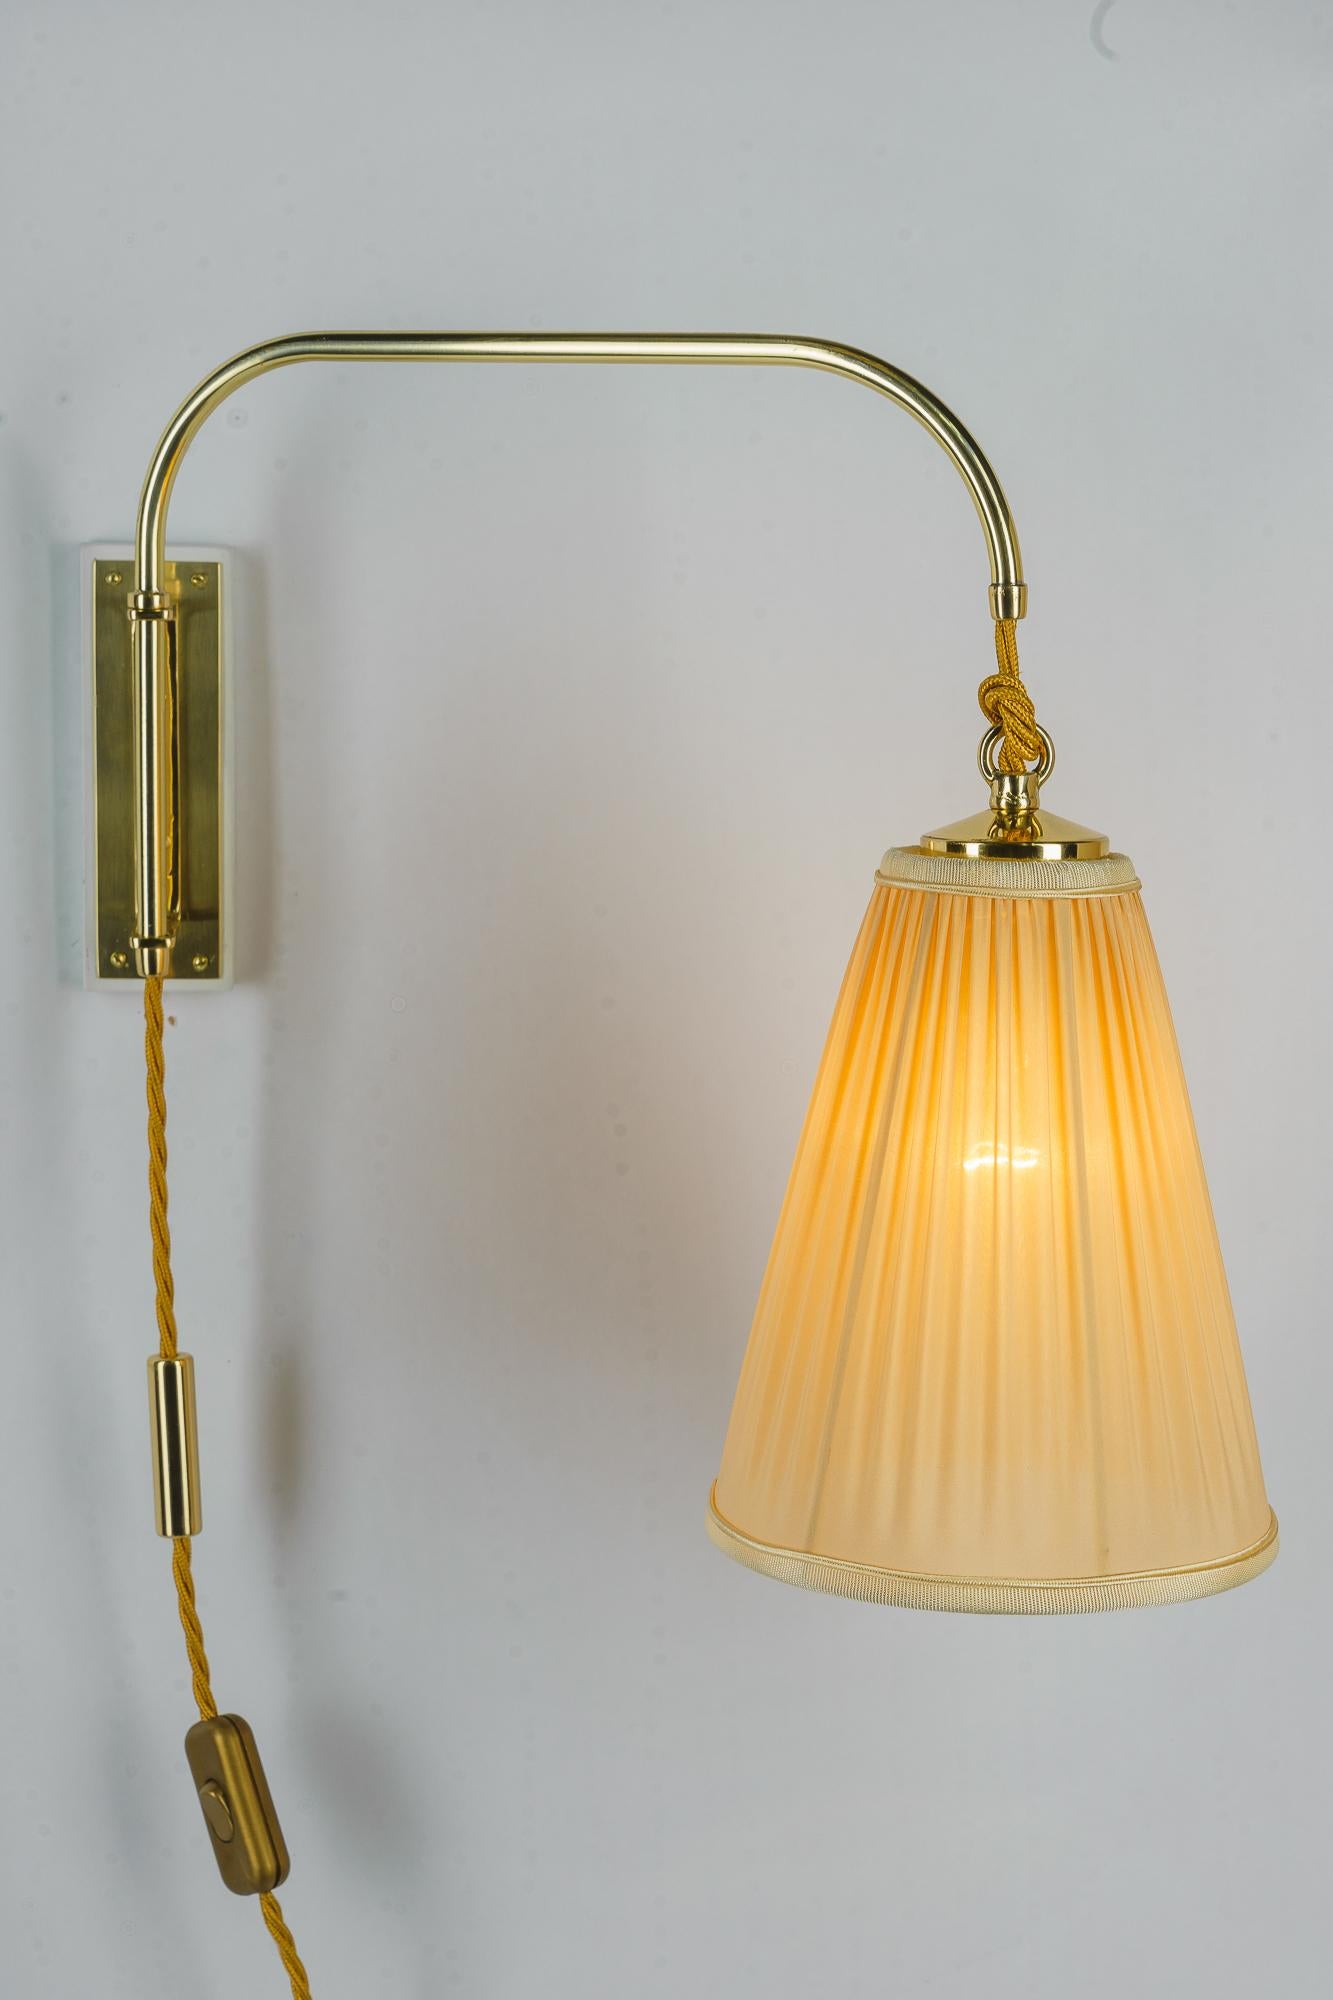  Cable in height adjustable art deco wall lamp 1920s For Sale 3